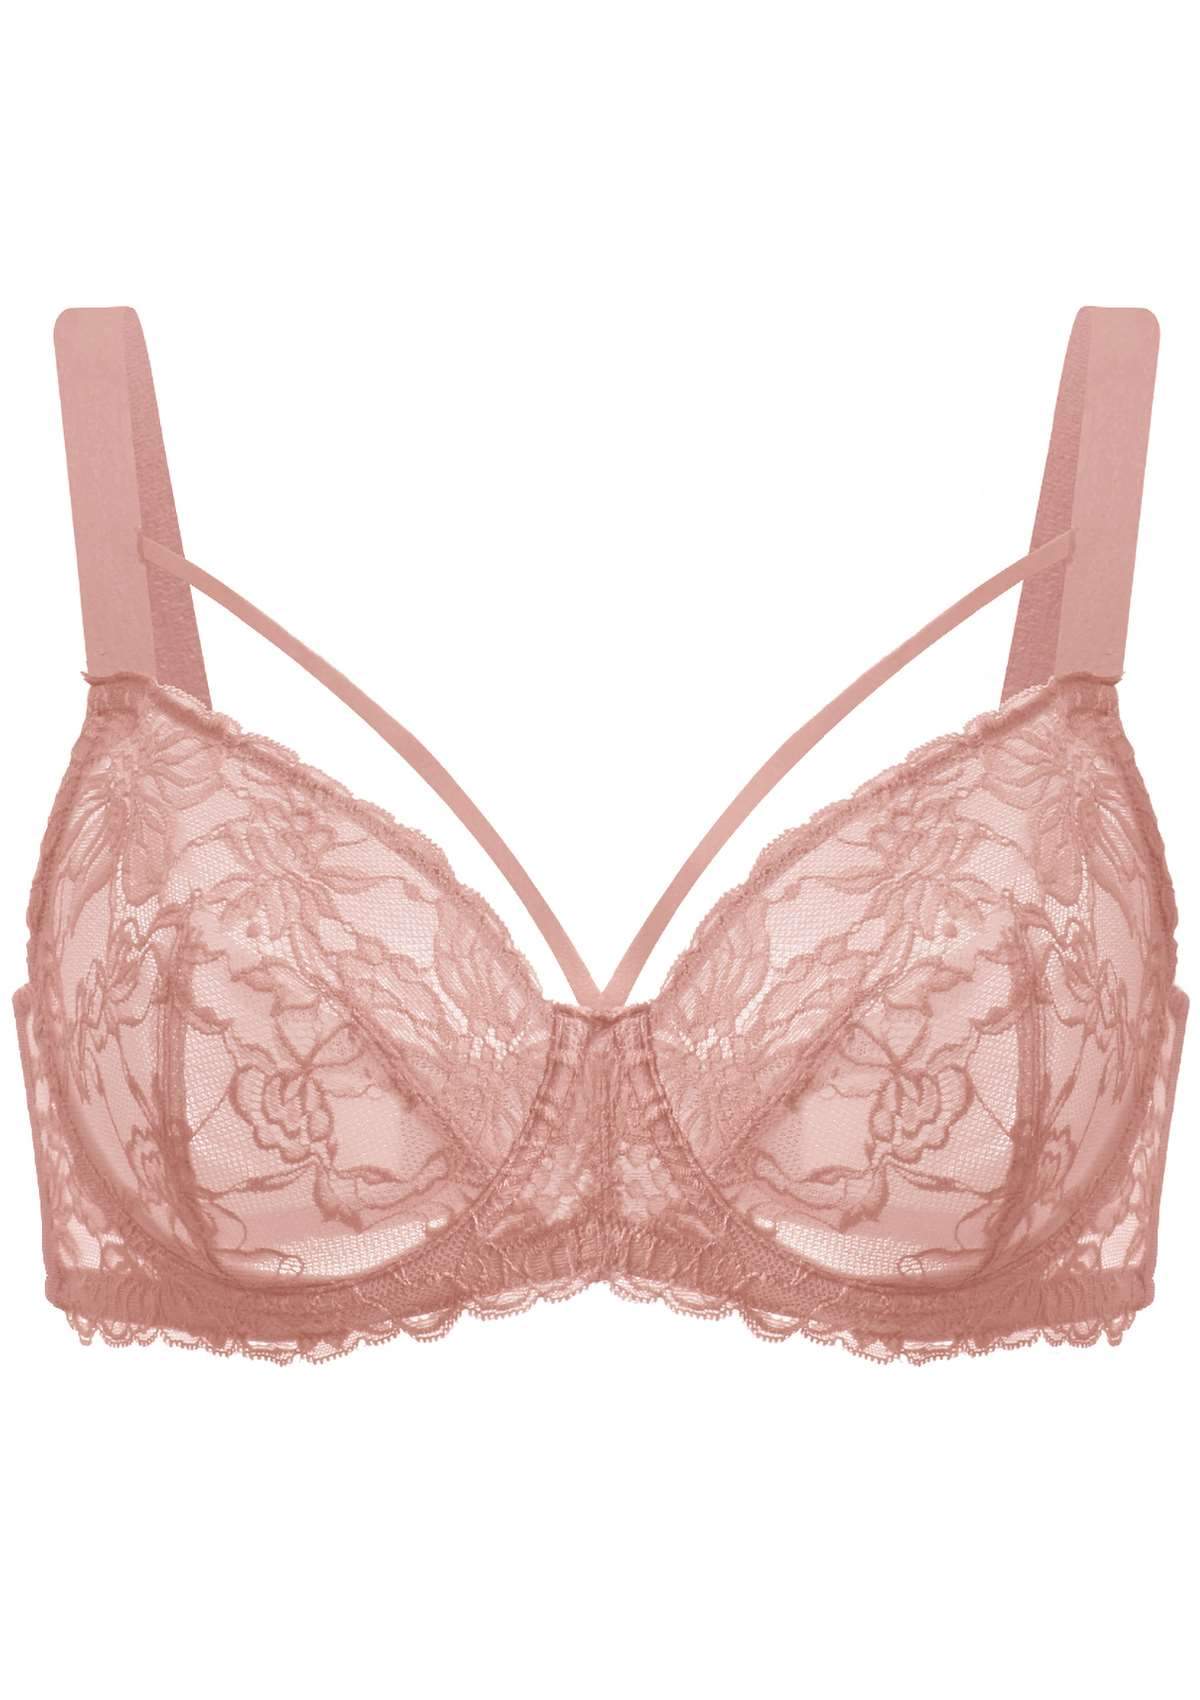 HSIA Pretty In Petals Lace Bra And Panty Sets: Bra For Big Boobs - Light Coral / 40 / DDD/F